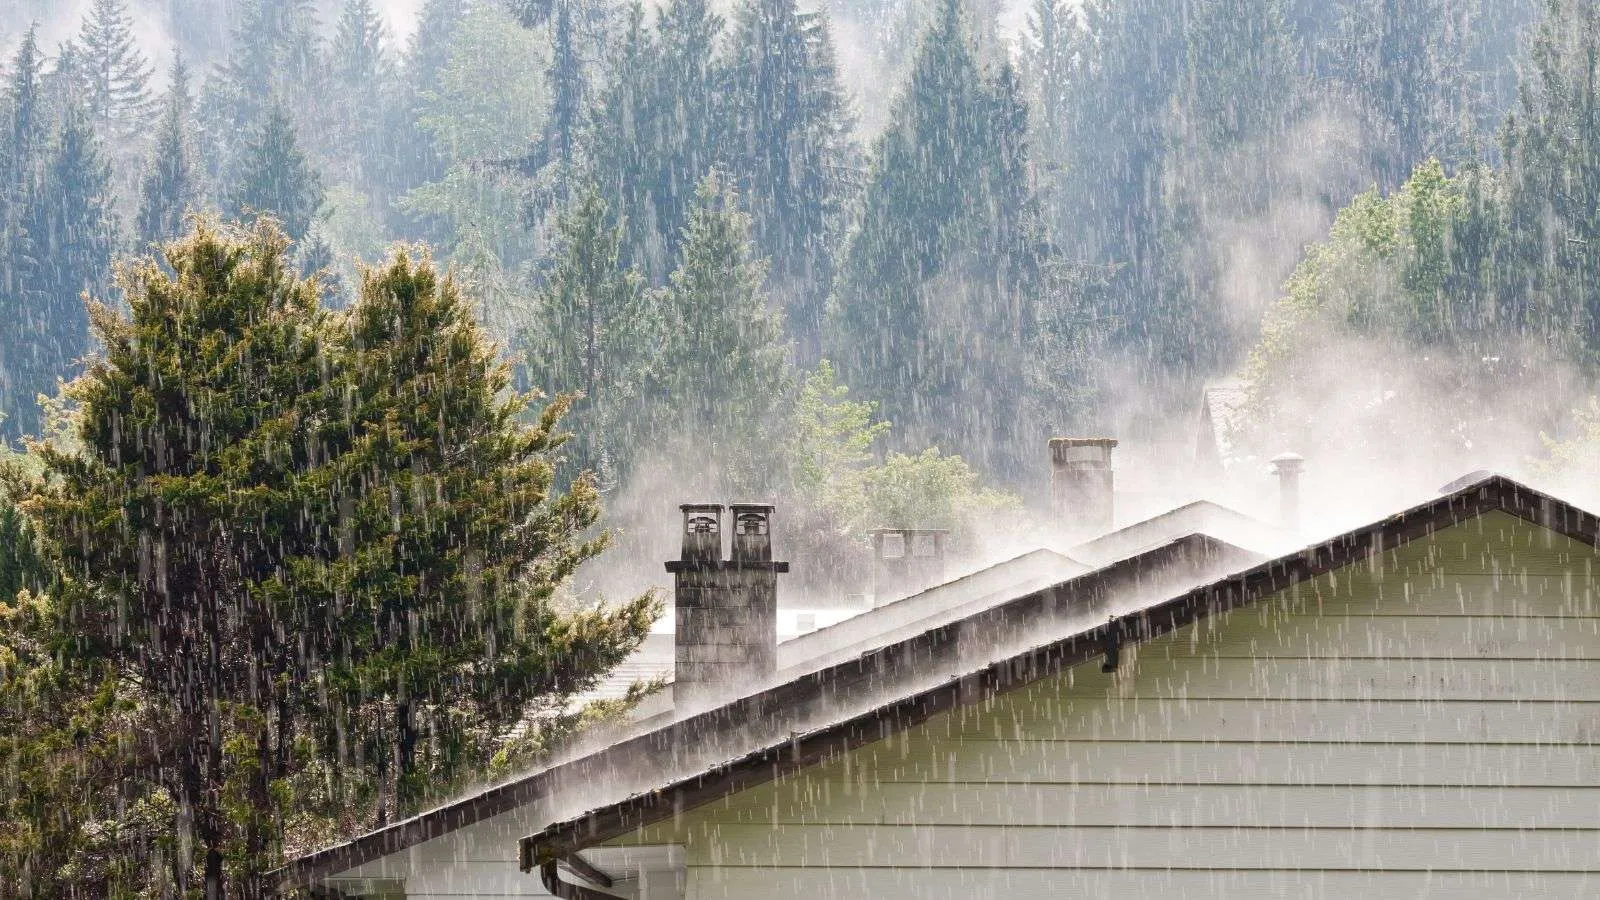 effects of acid rain on synthetic rubber roofs - bighomeprojects.com